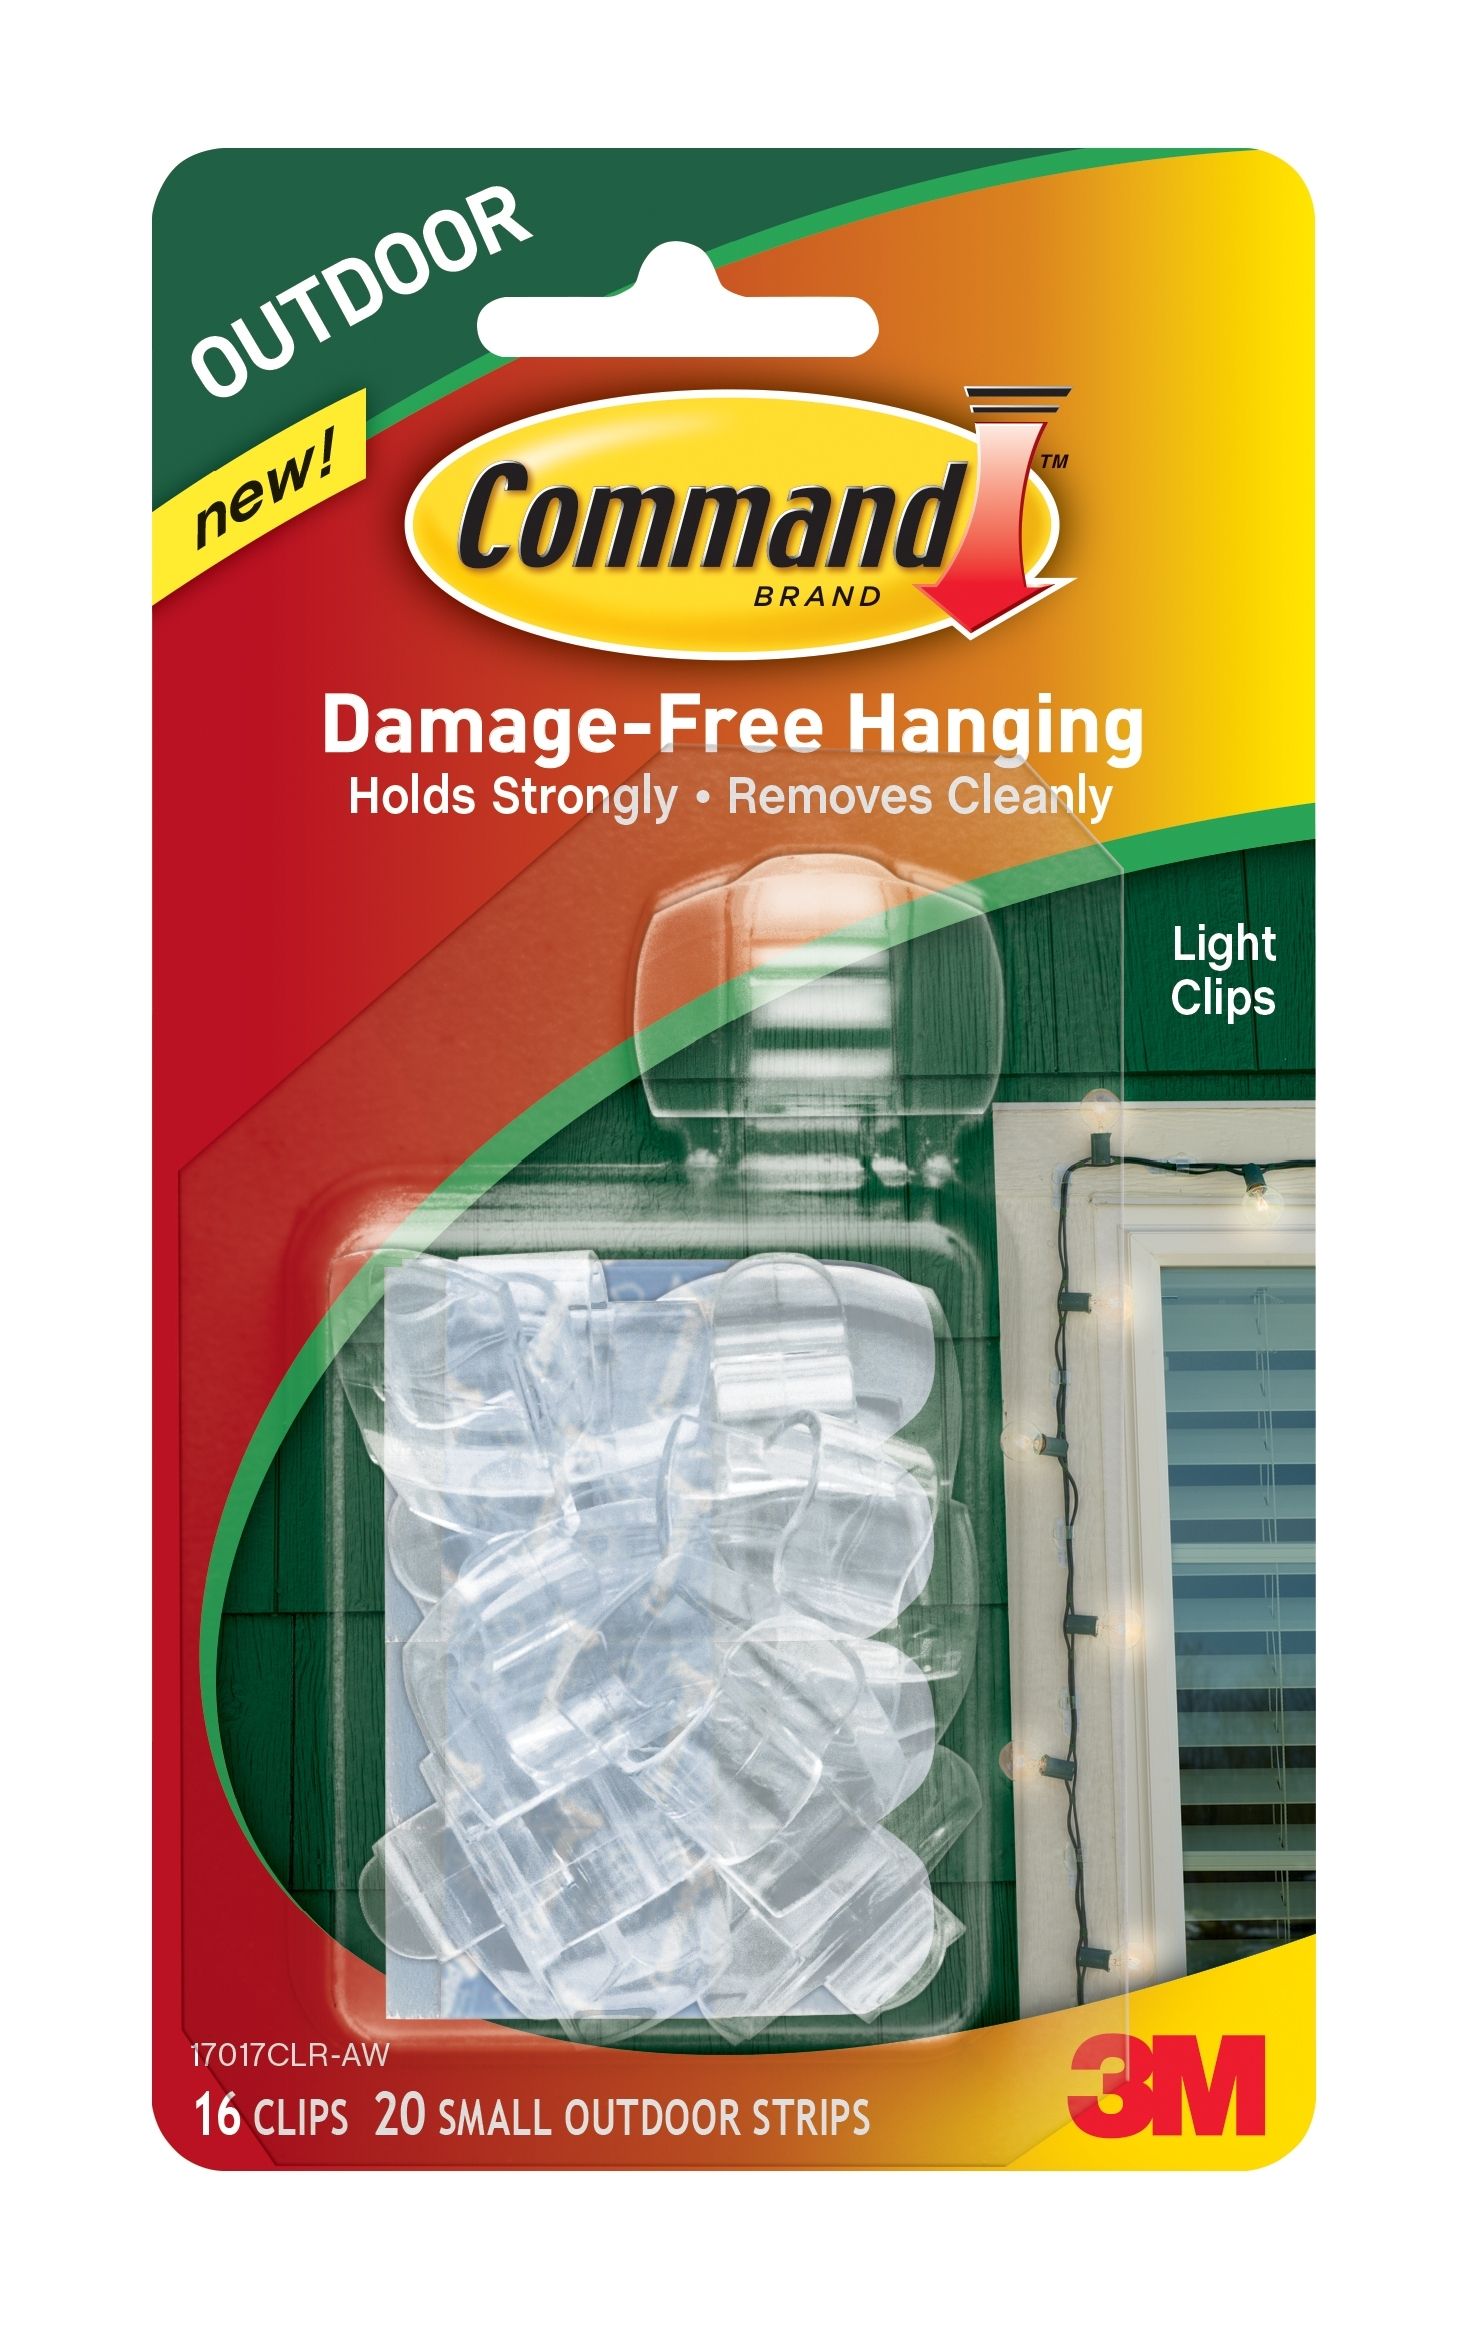 3m Introduces New Command Outdoor Decorating Products | Business Wire Intended For Outdoor Lights Hanging Clips (View 6 of 15)